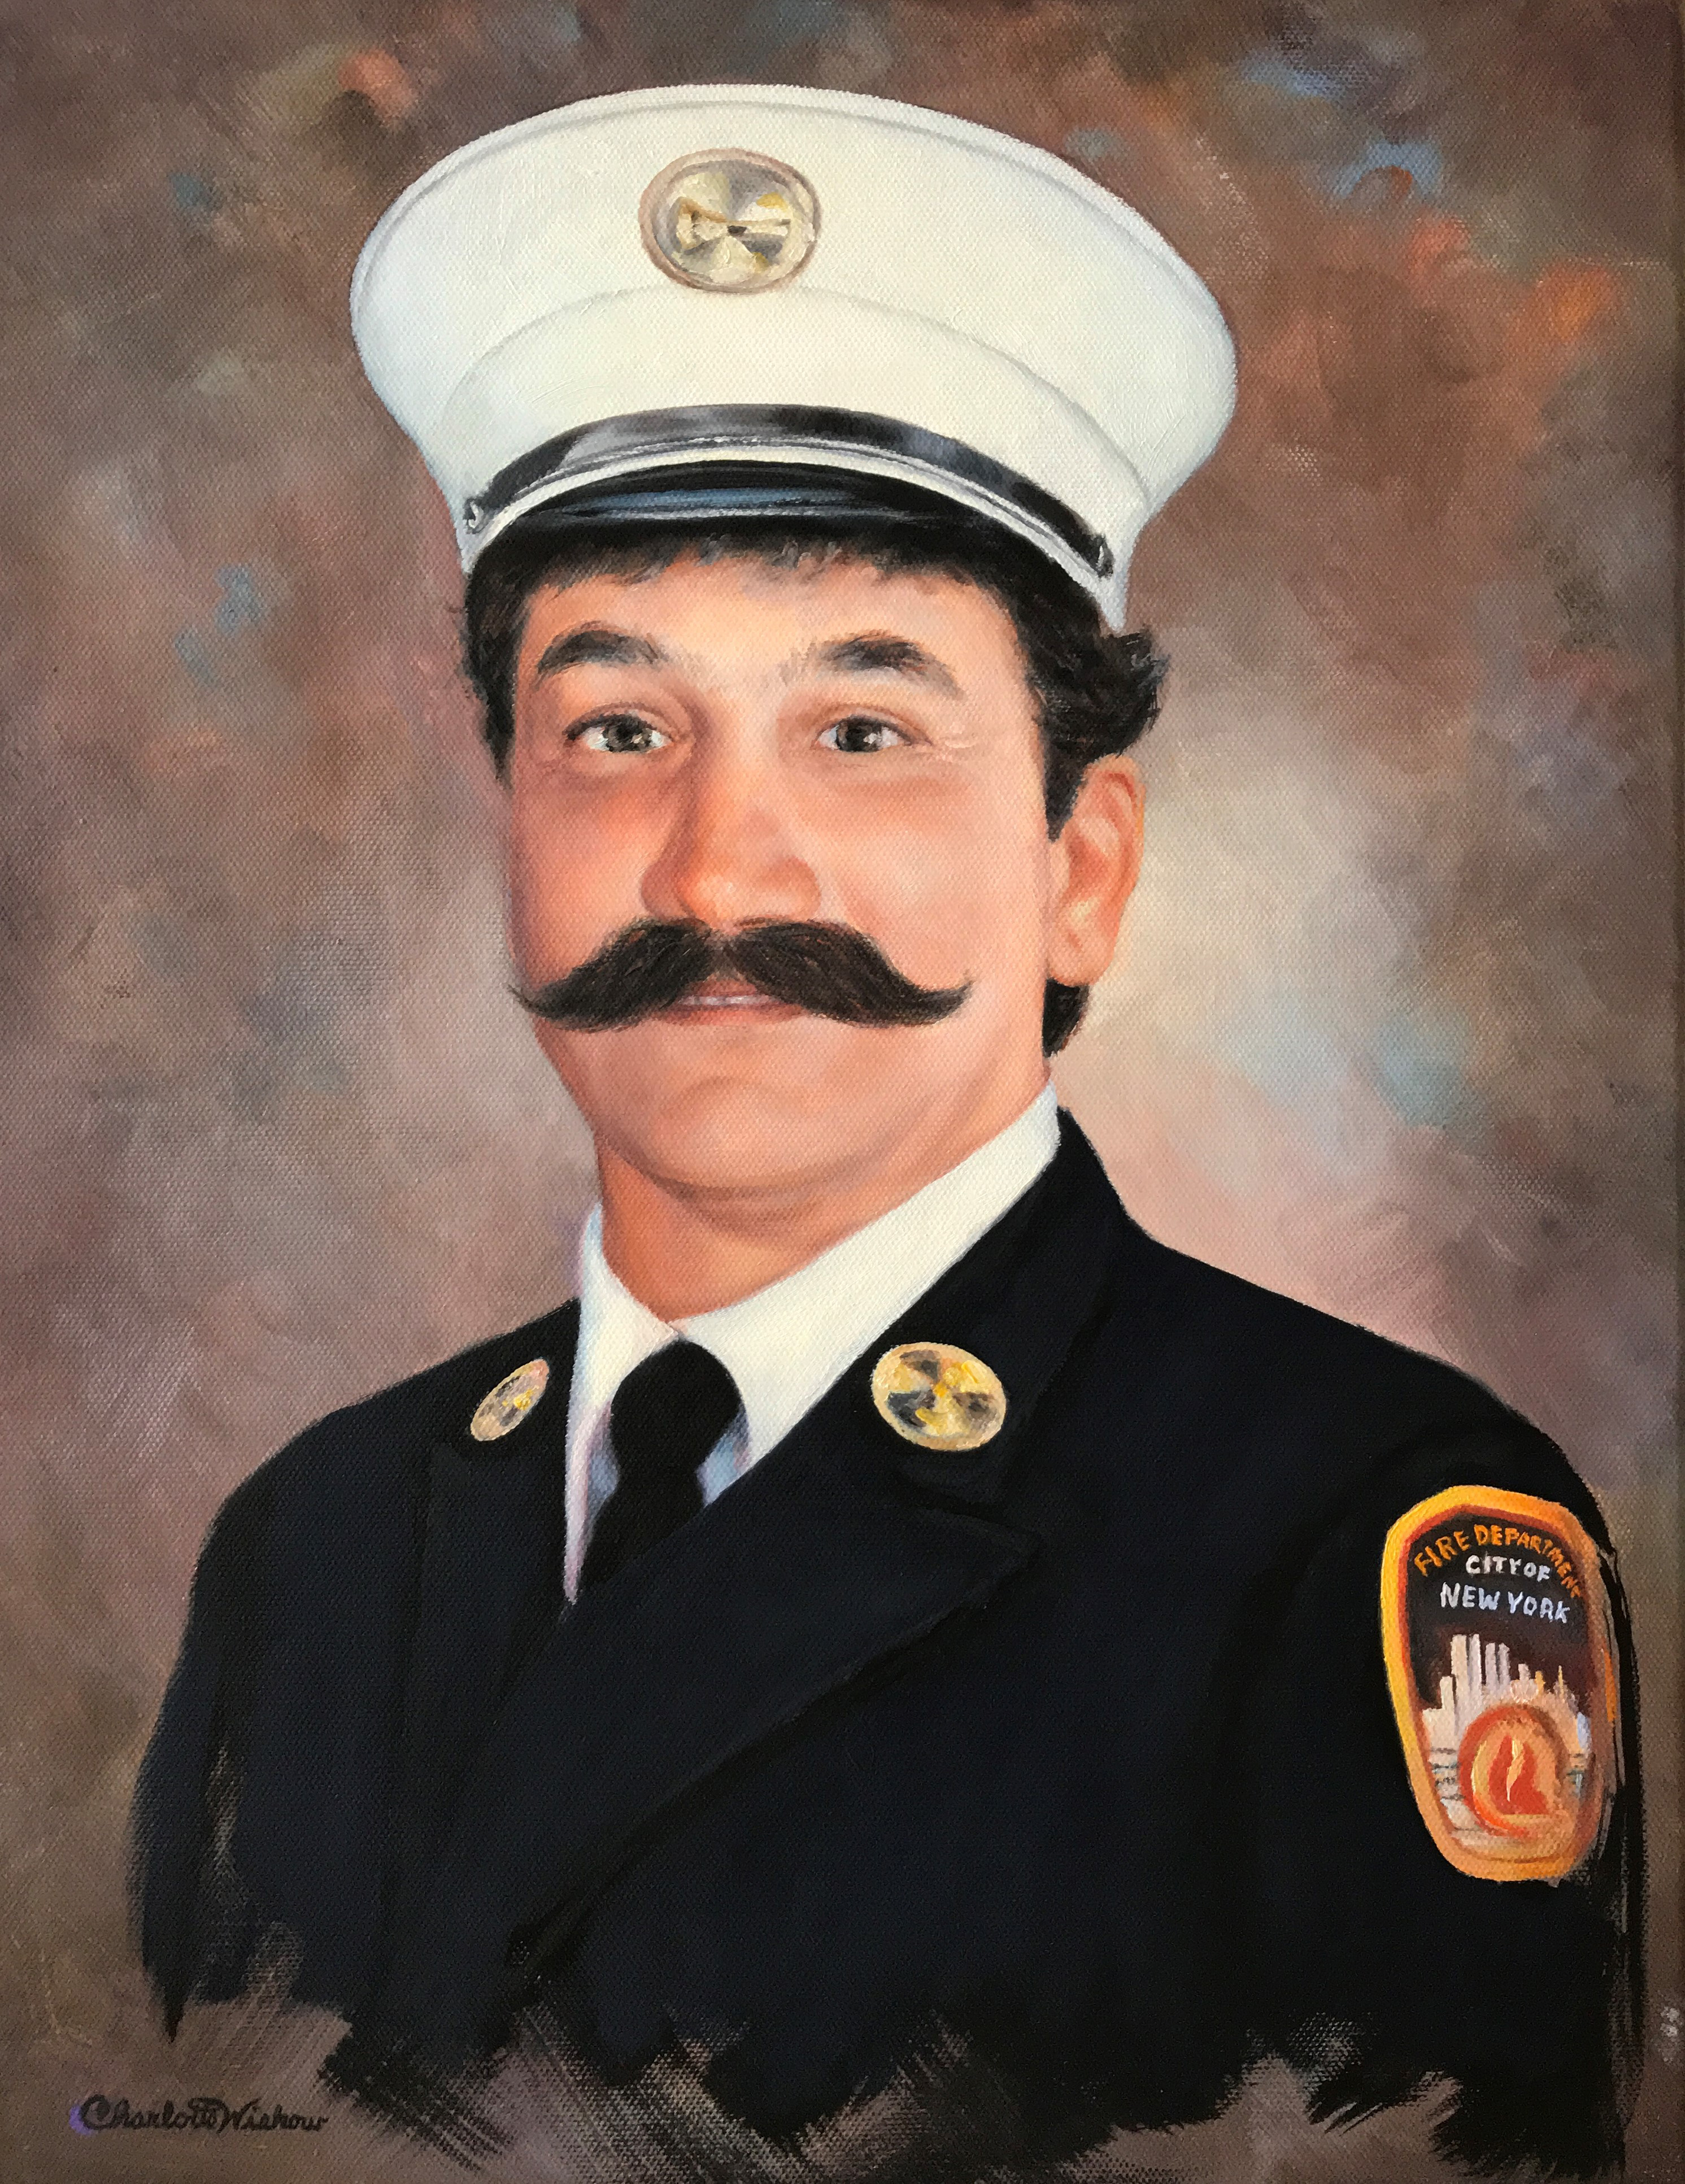 Fallen Hero Lt. Kevin P. Nerney, New York Fire Department” title=